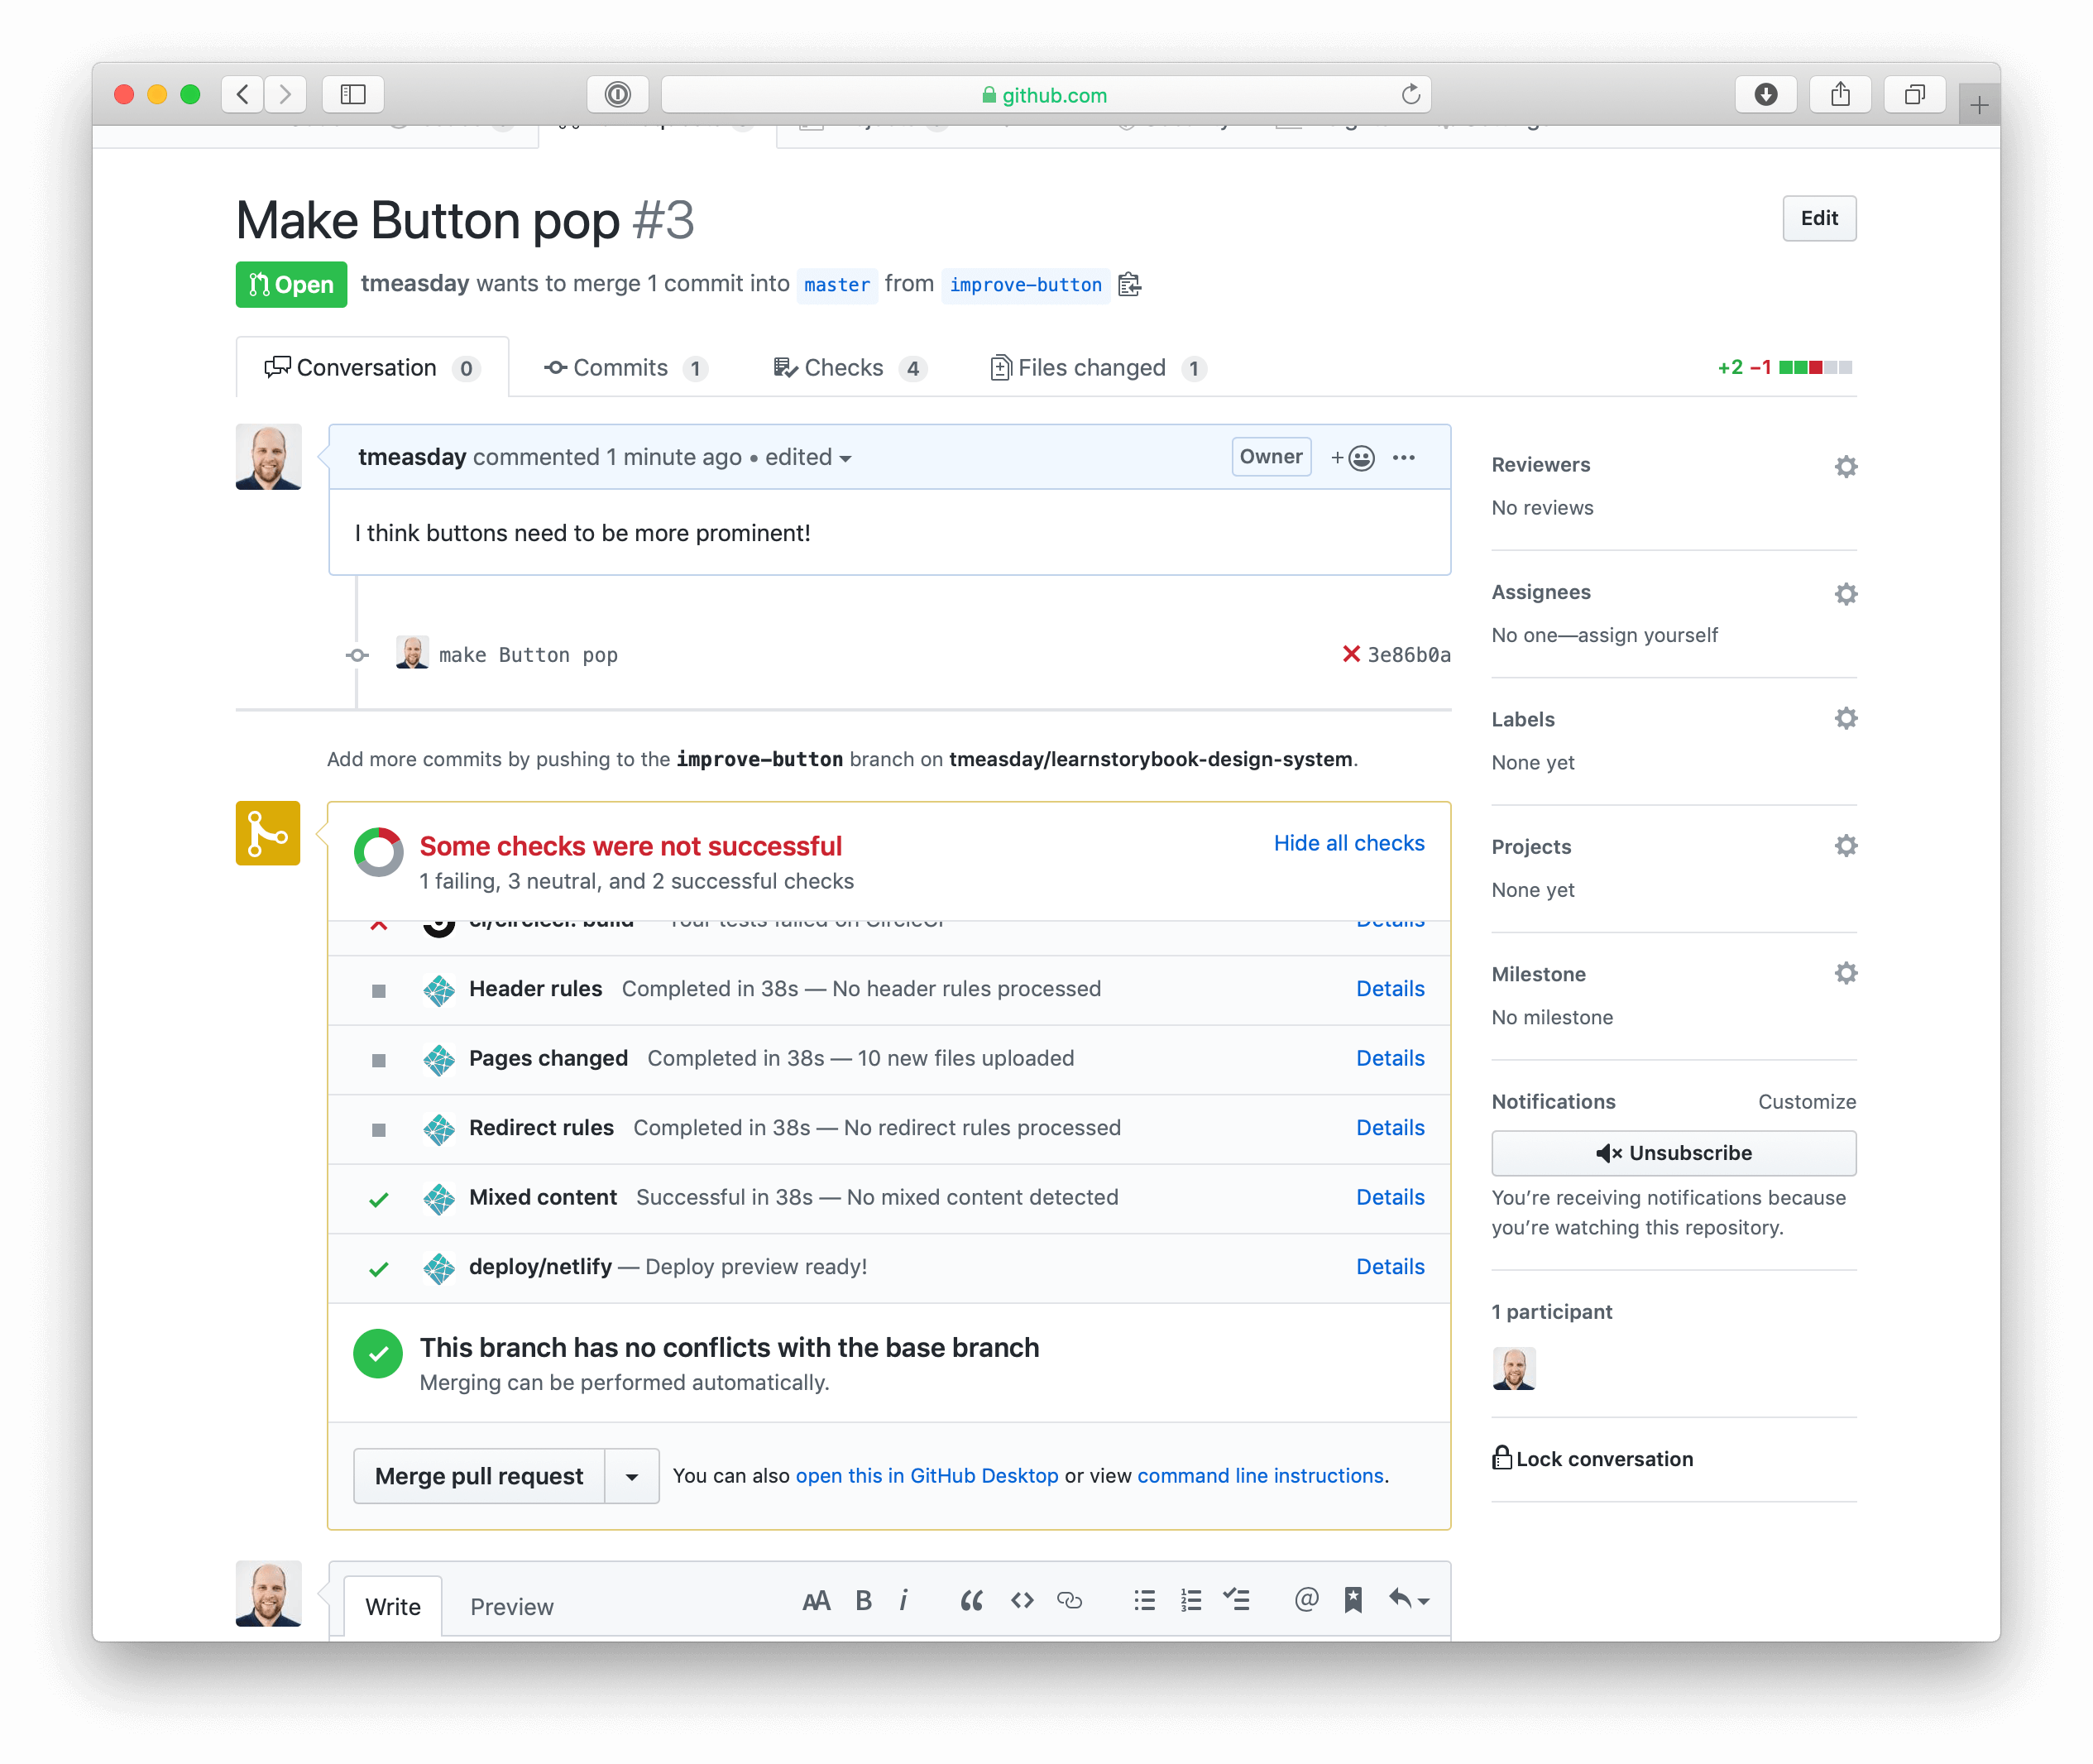 Created a PR in GitHub